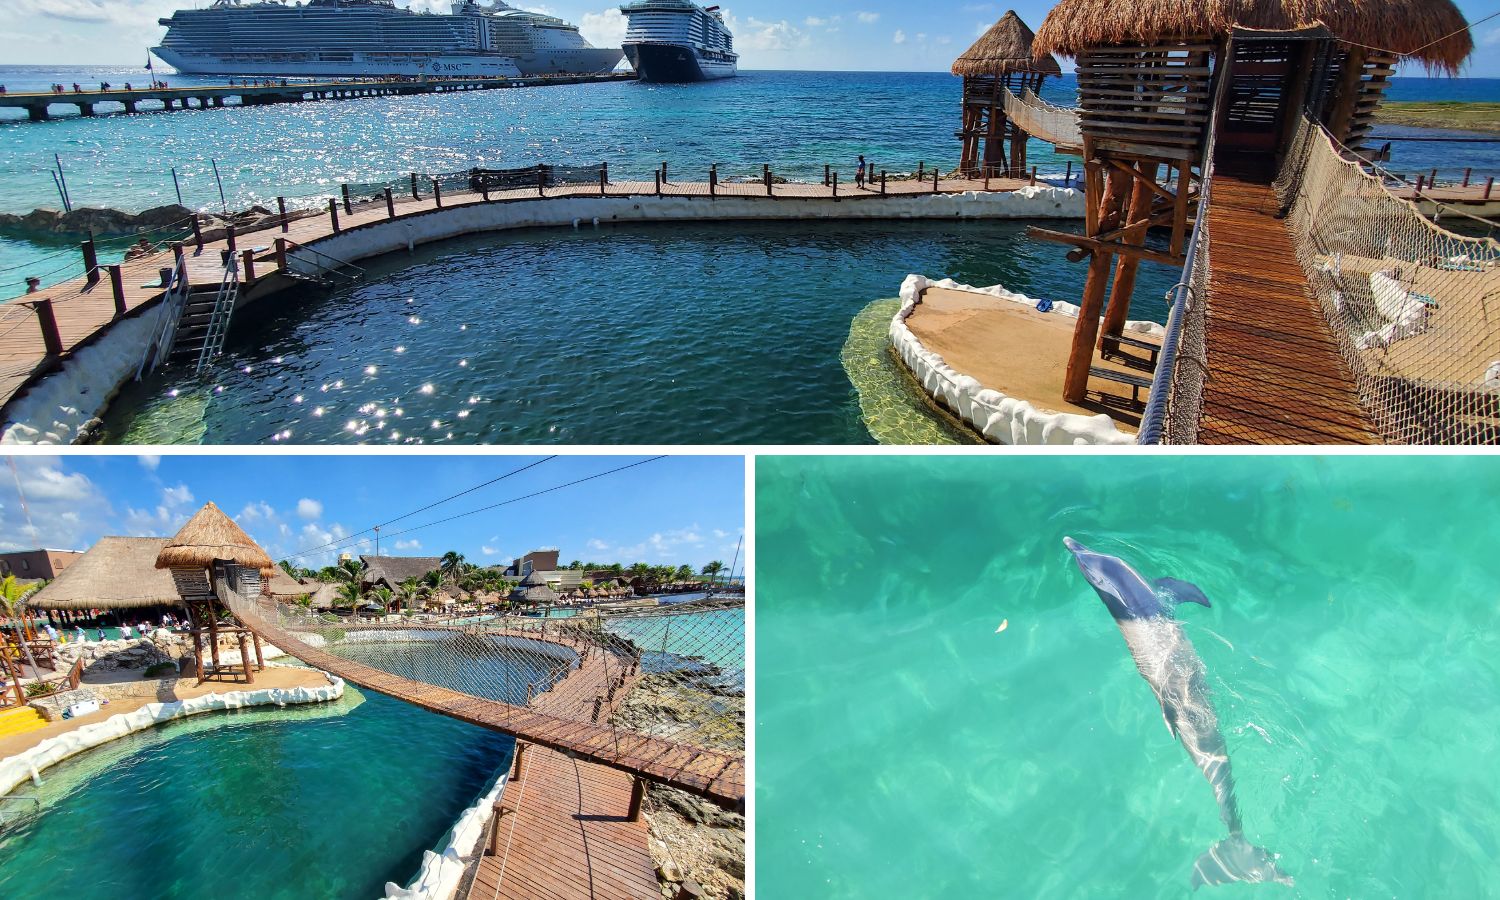 Dolphin Discovery at Costa Maya cruise port